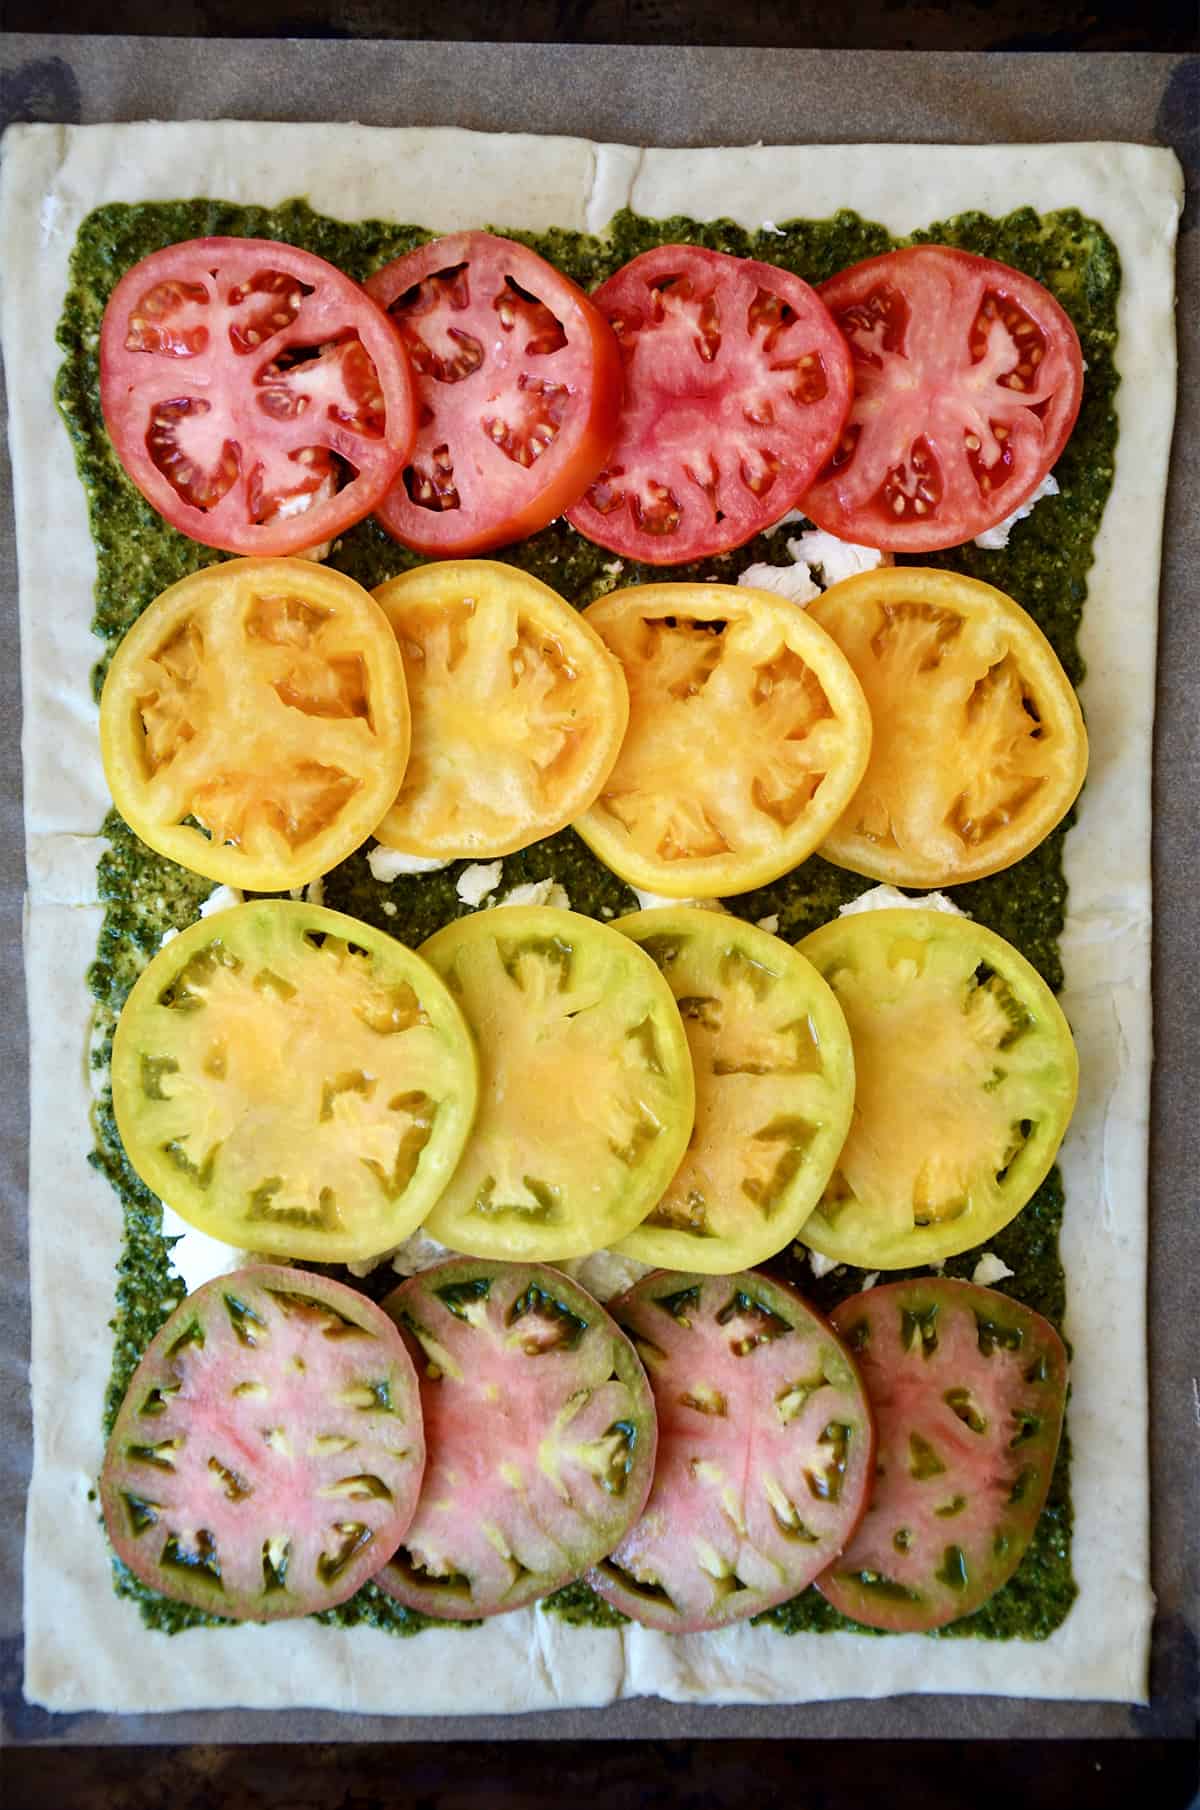 A rectangle of puff pastry topped with pesto, crumbled goat cheese and sliced tomatoes.